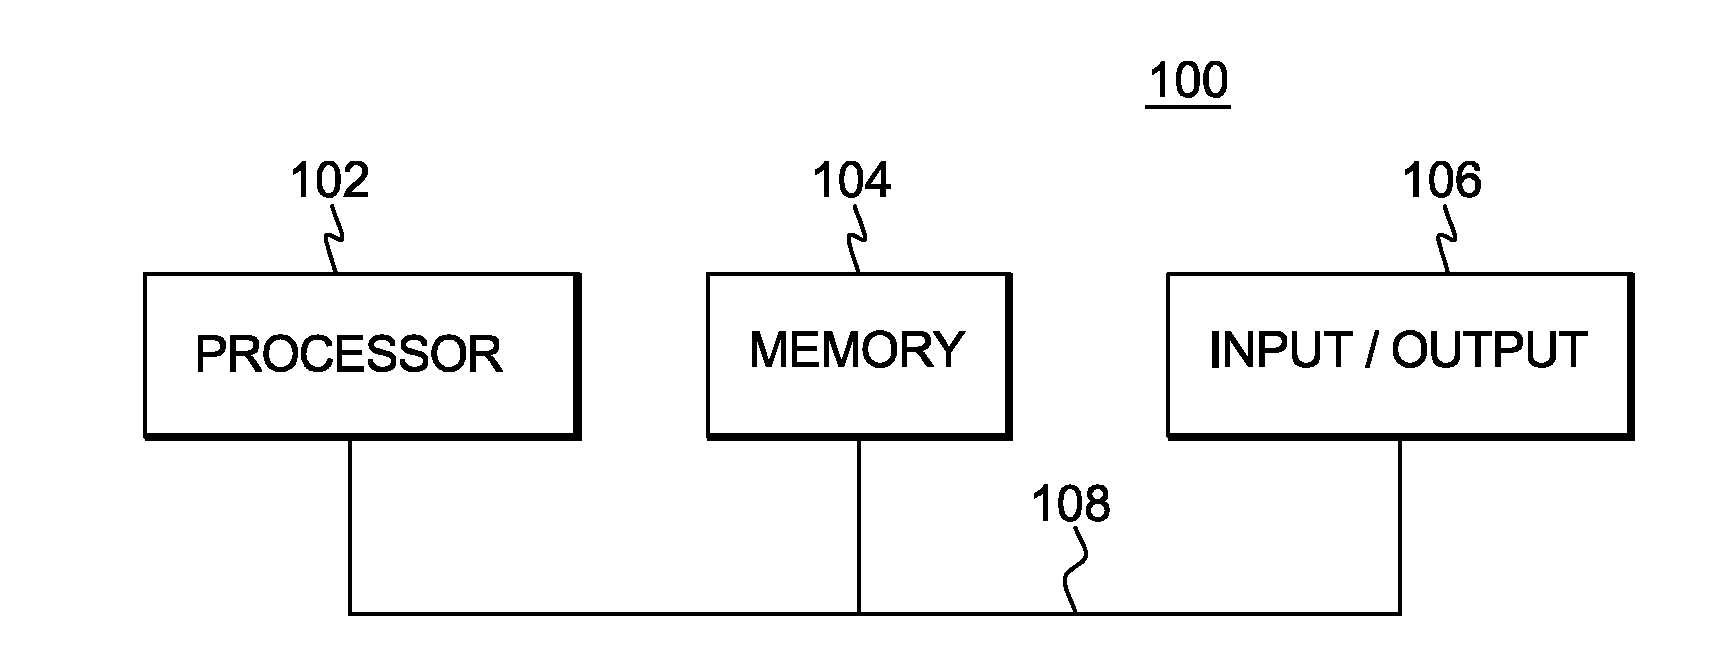 Instruction to load data up to a specified memory boundary indicated by the instruction